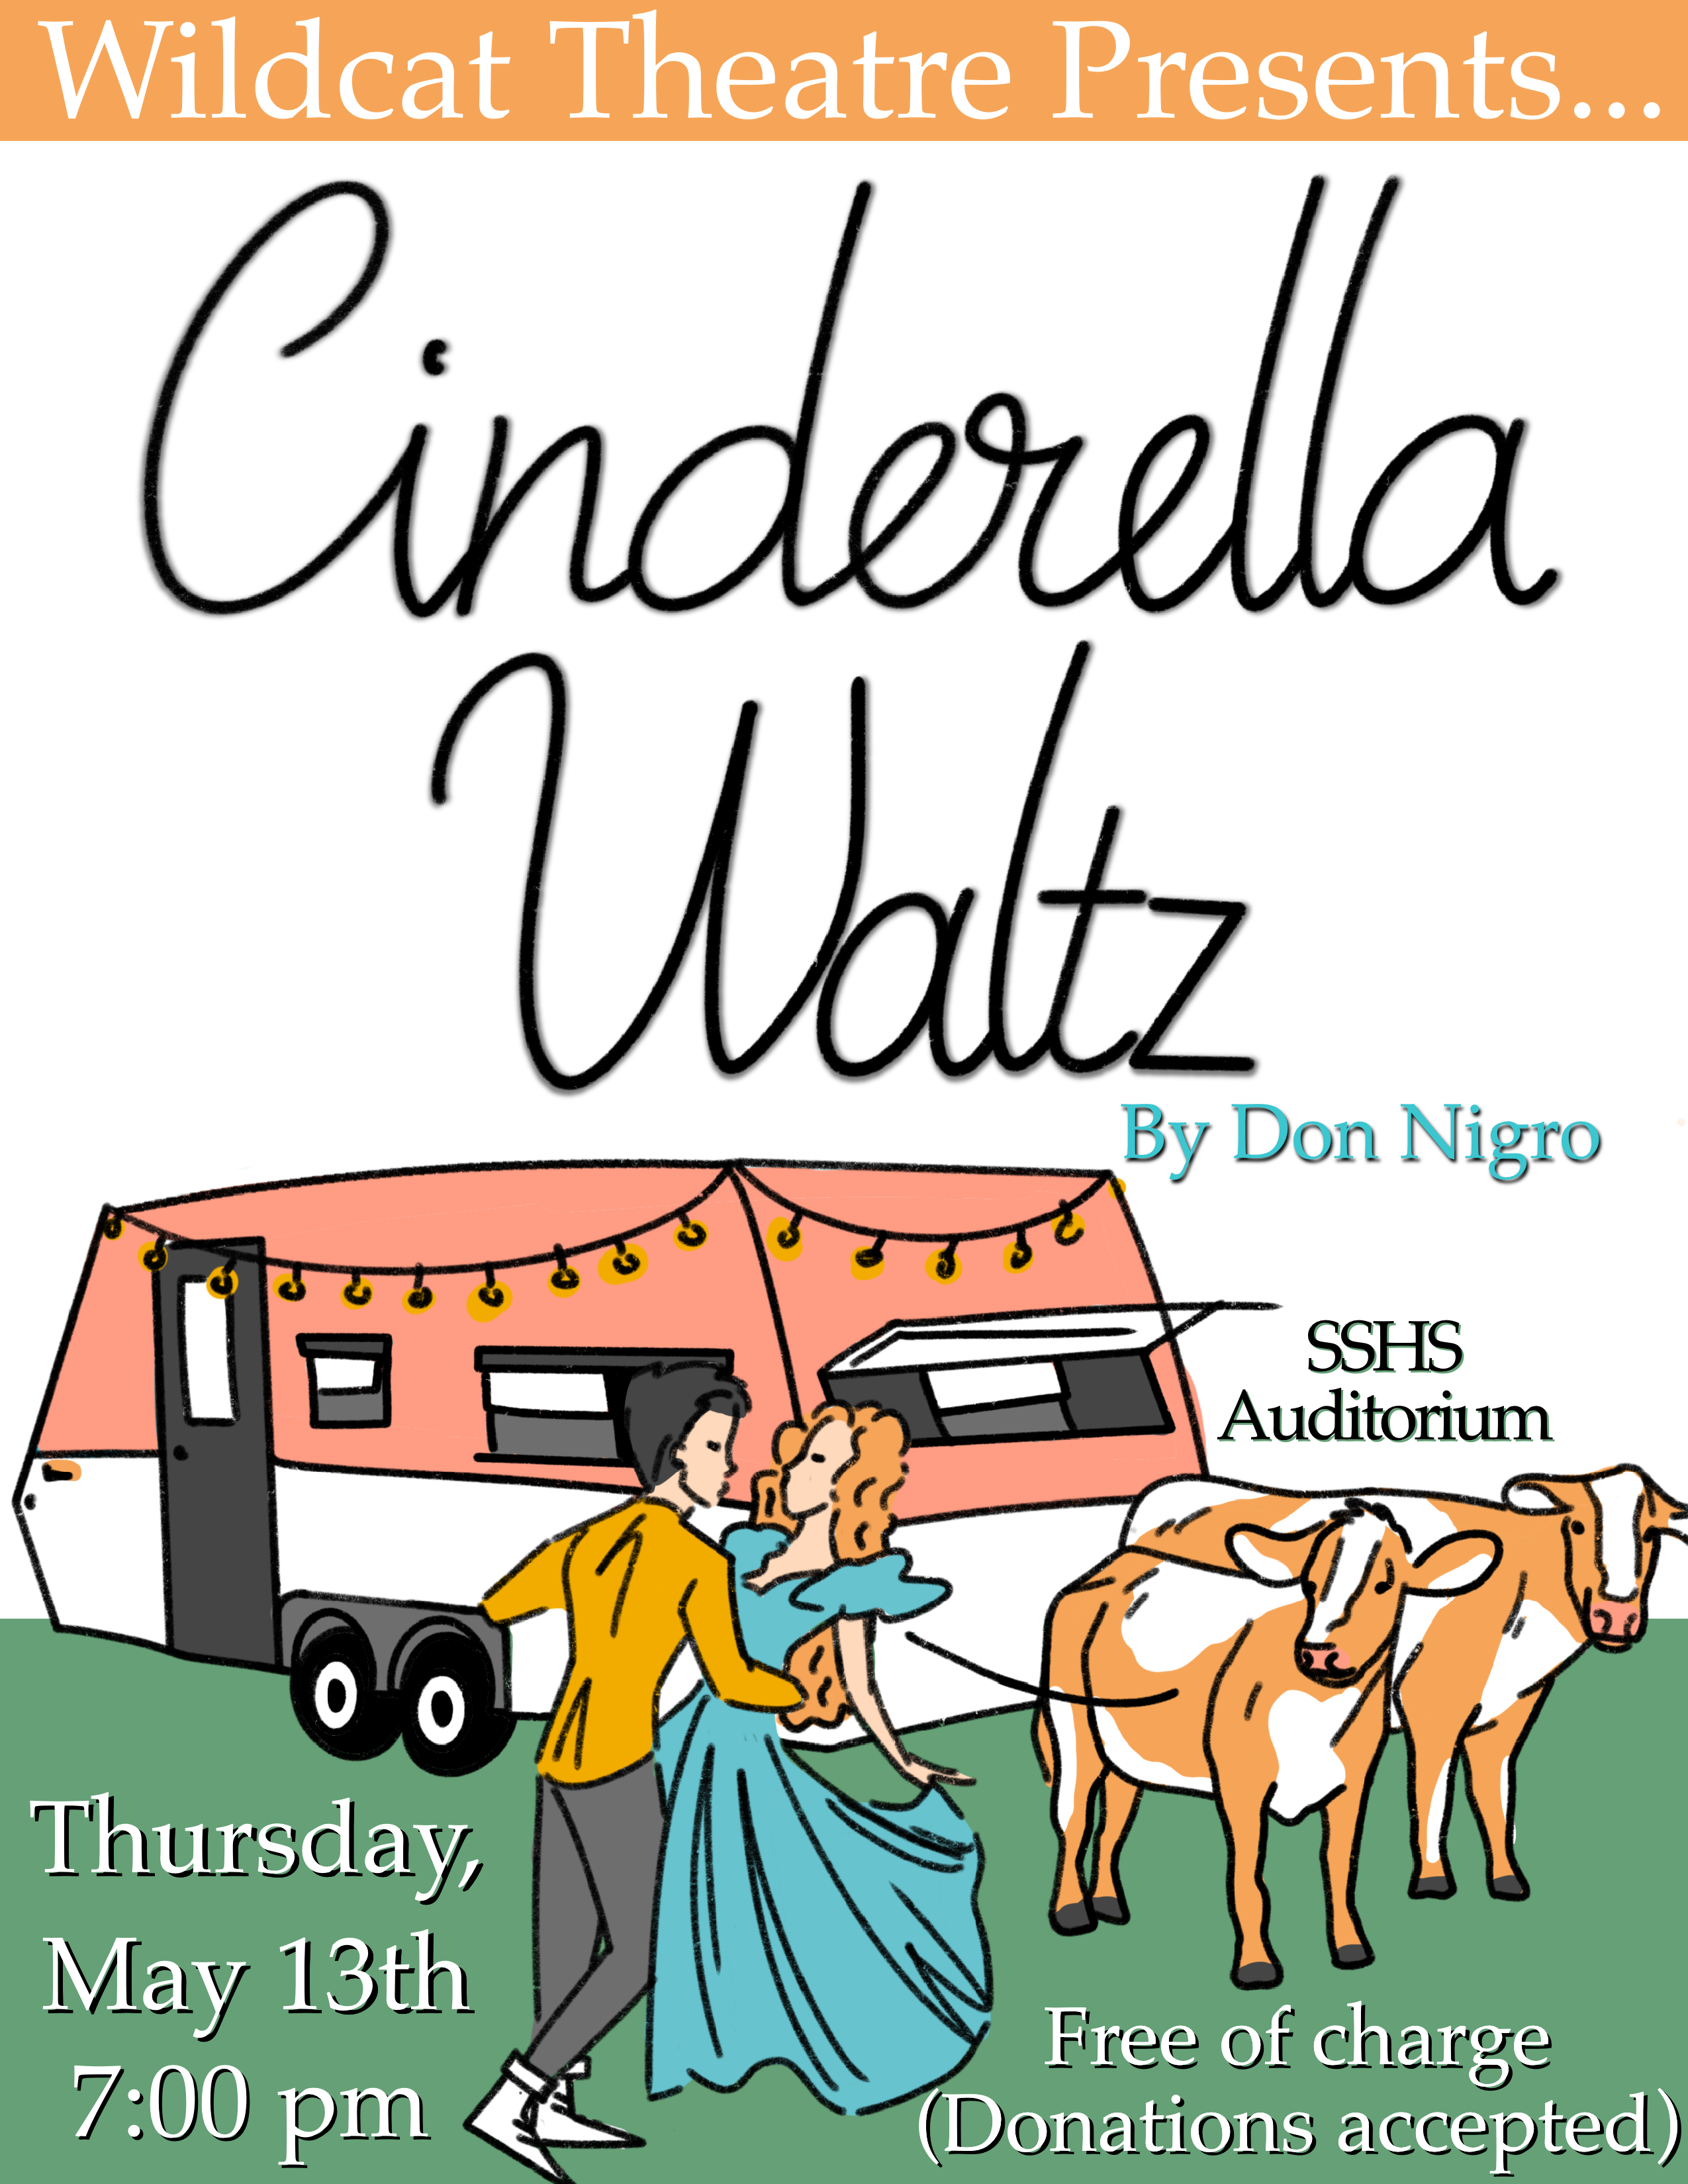 SSHS Theatre Performing ‘Cinderella Waltz’ on Thursday, May 13th